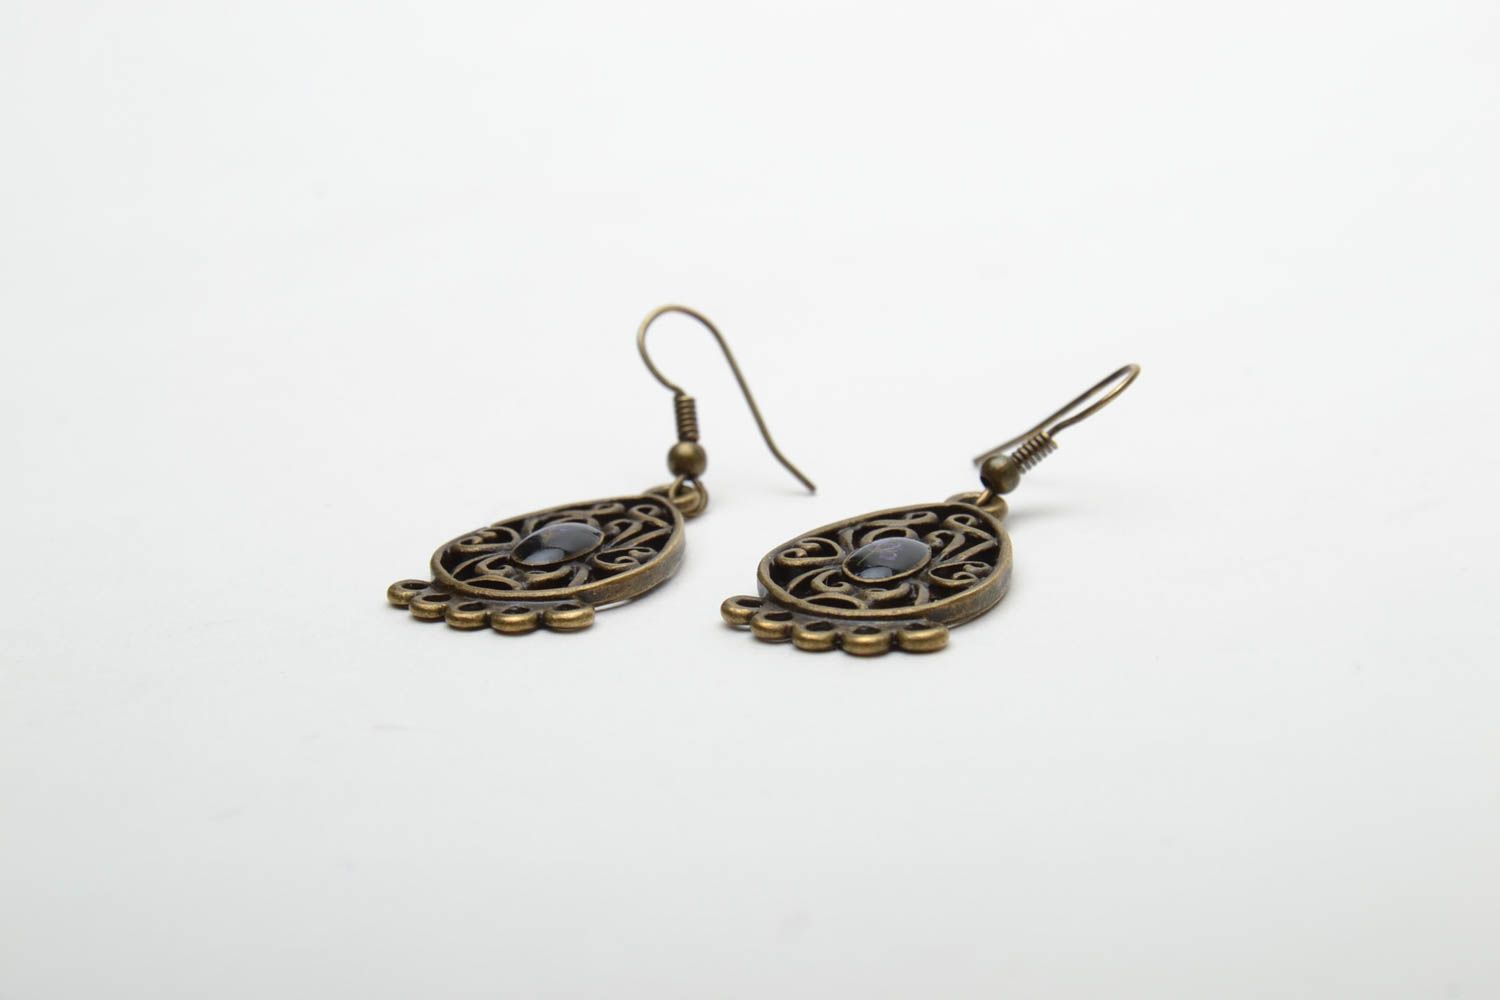 Vintage earrings with natural flowers photo 4